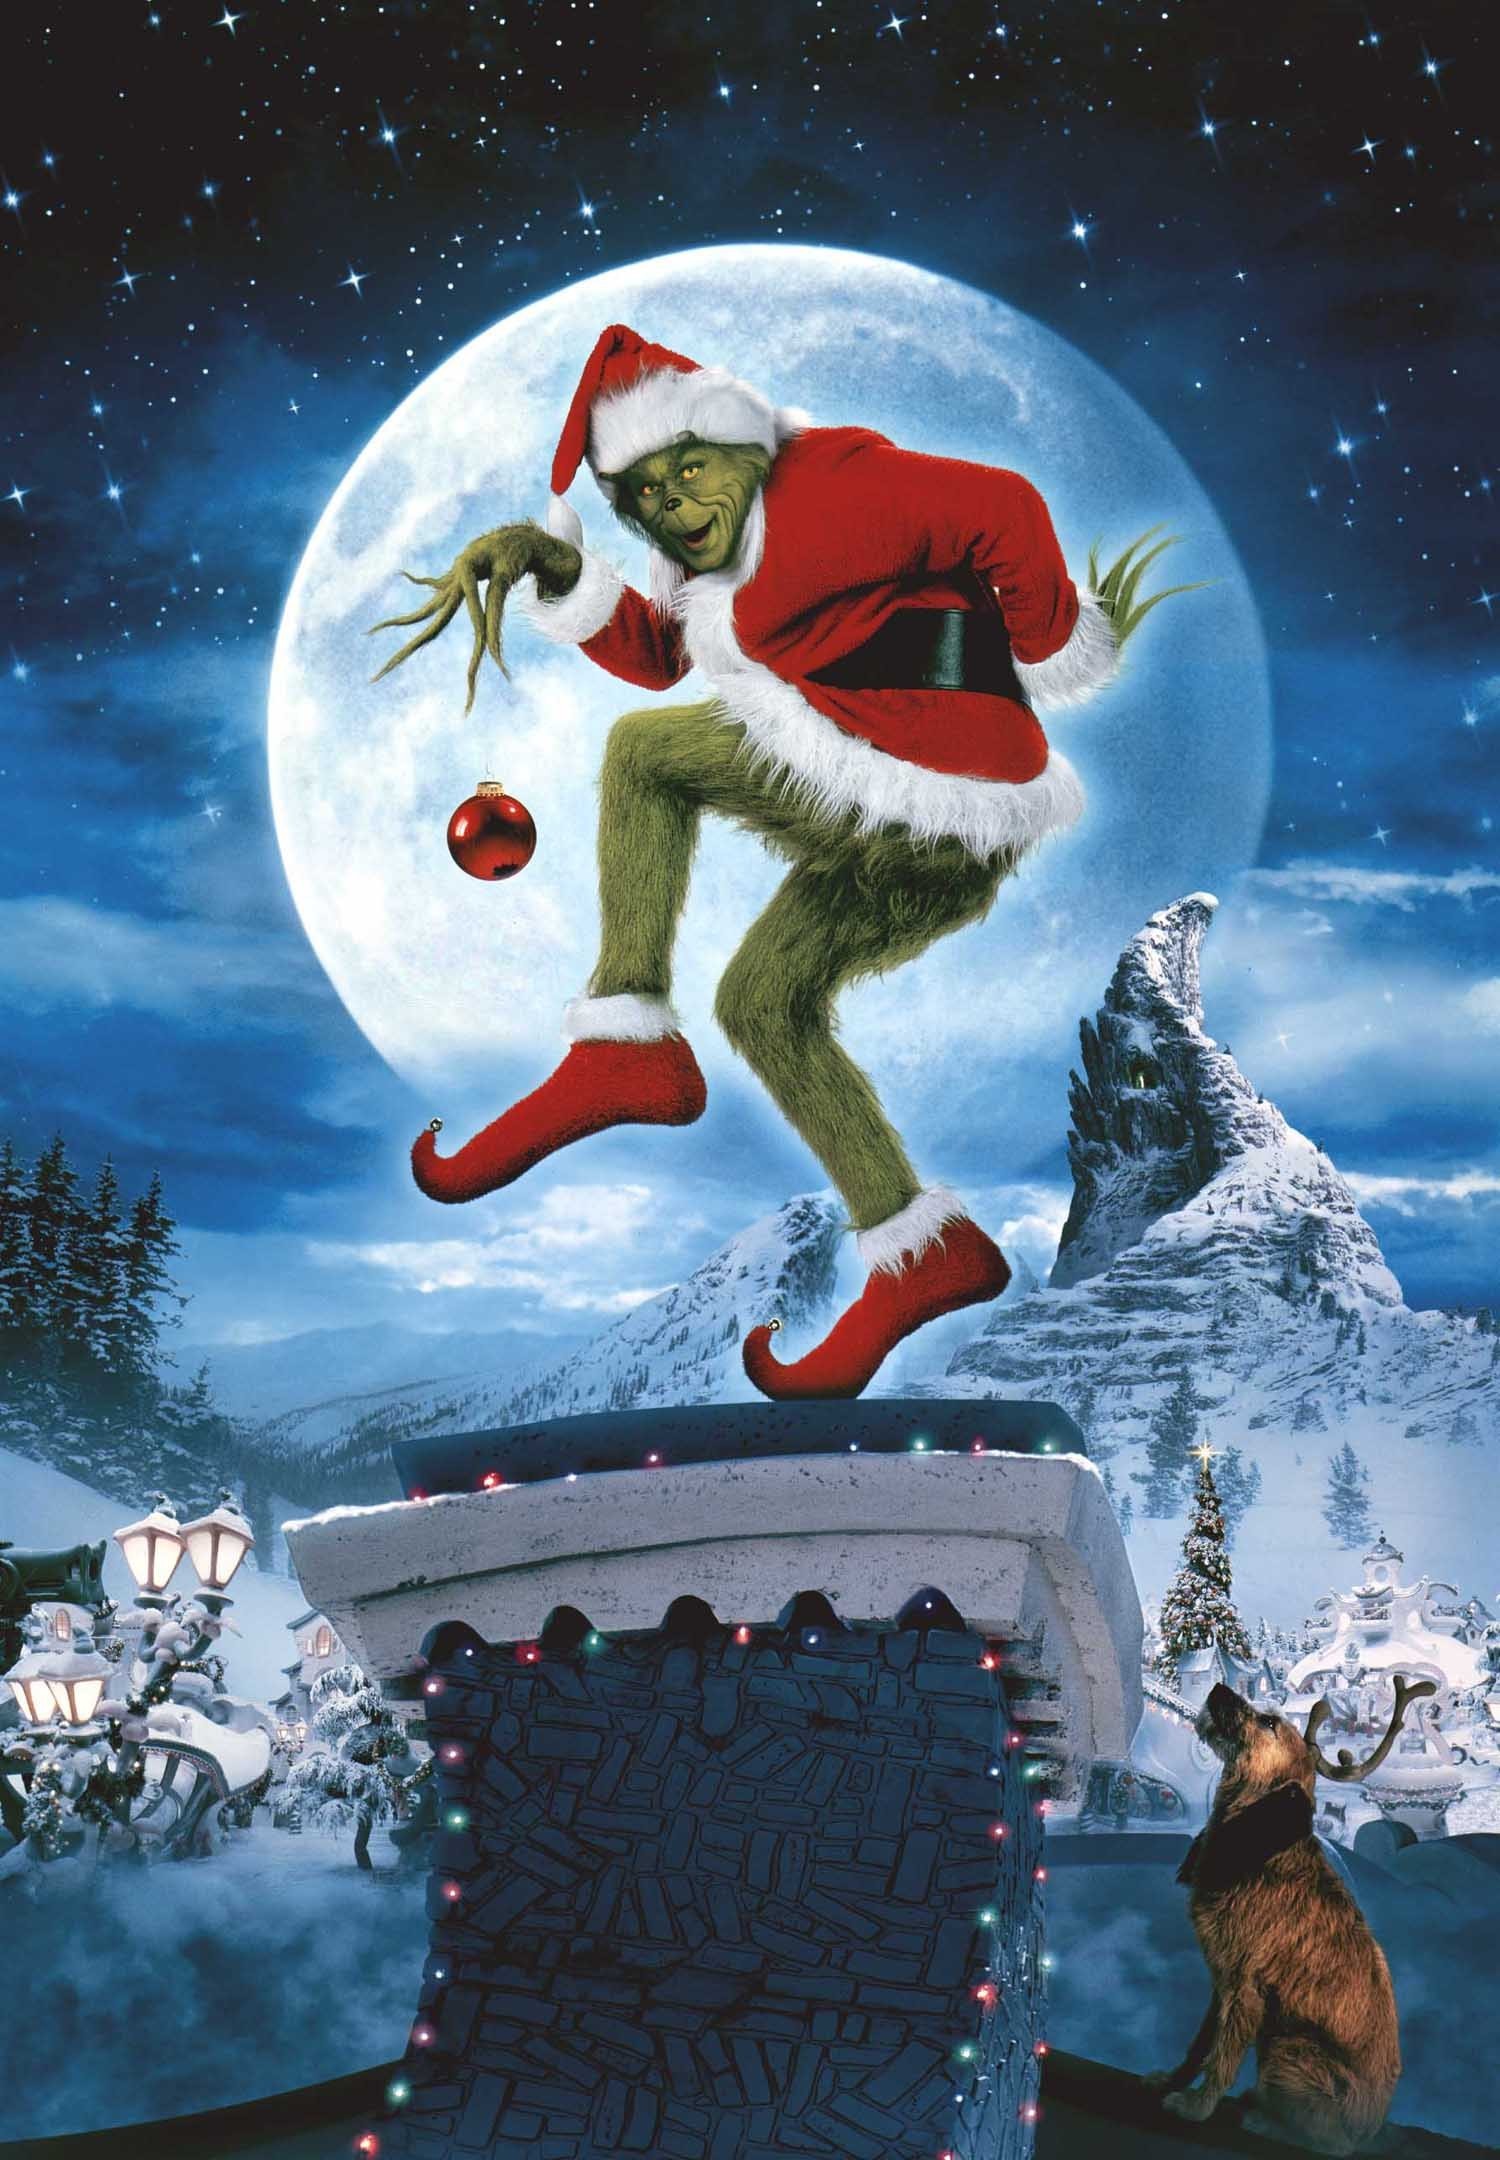 How The Grinch Stole Christmas Cartoon 4K HD The Grinch Wallpapers  HD  Wallpapers  ID 51367